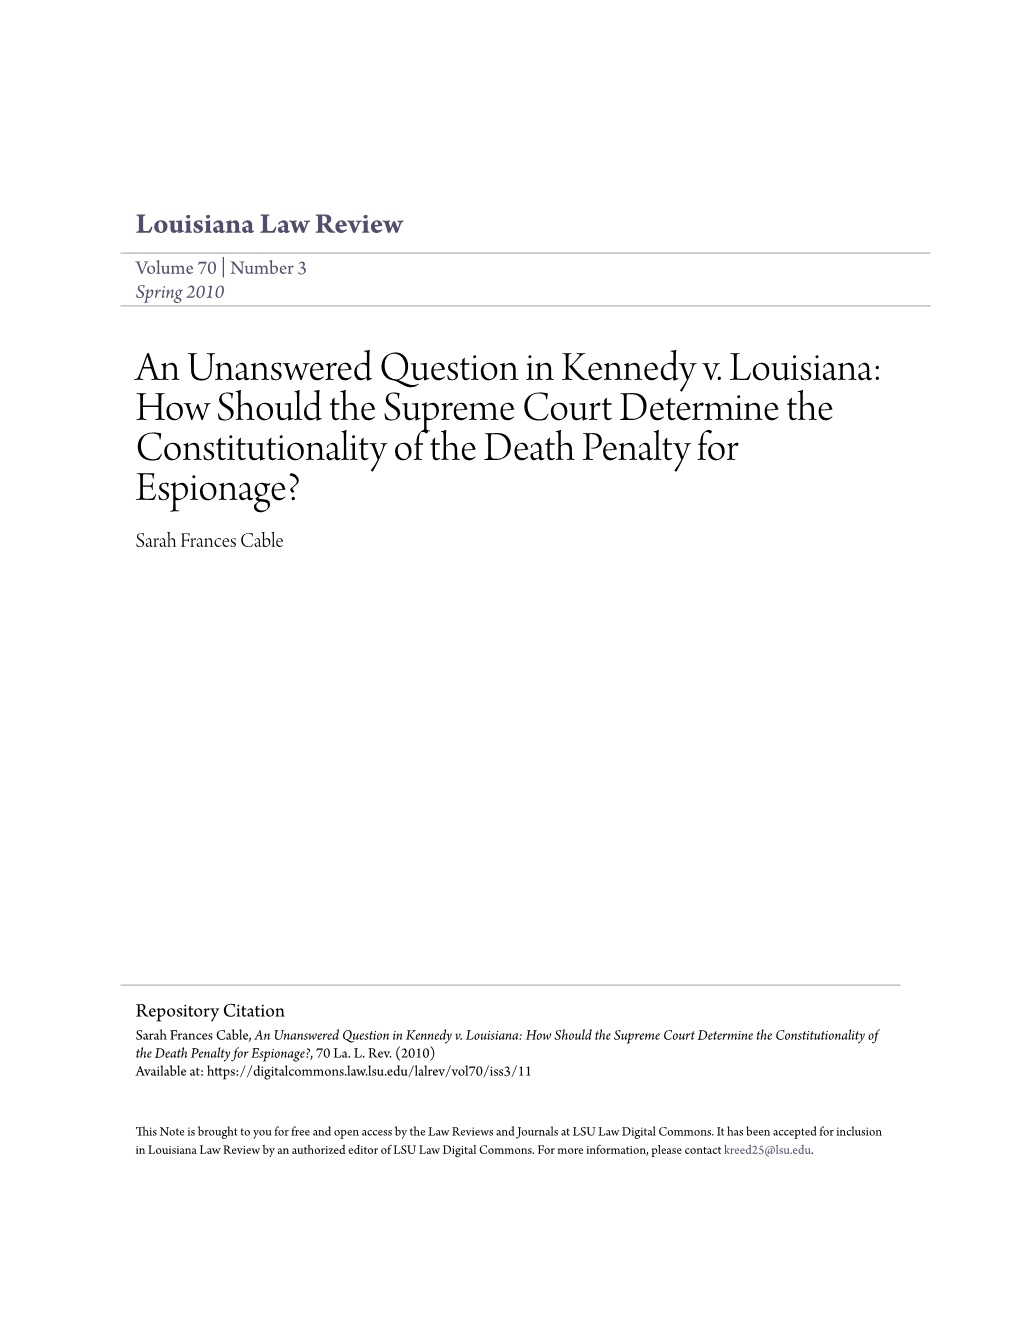 An Unanswered Question in Kennedy V. Louisiana: How Should the Supreme Court Determine the Constitutionality of the Death Penalty for Espionage? Sarah Frances Cable